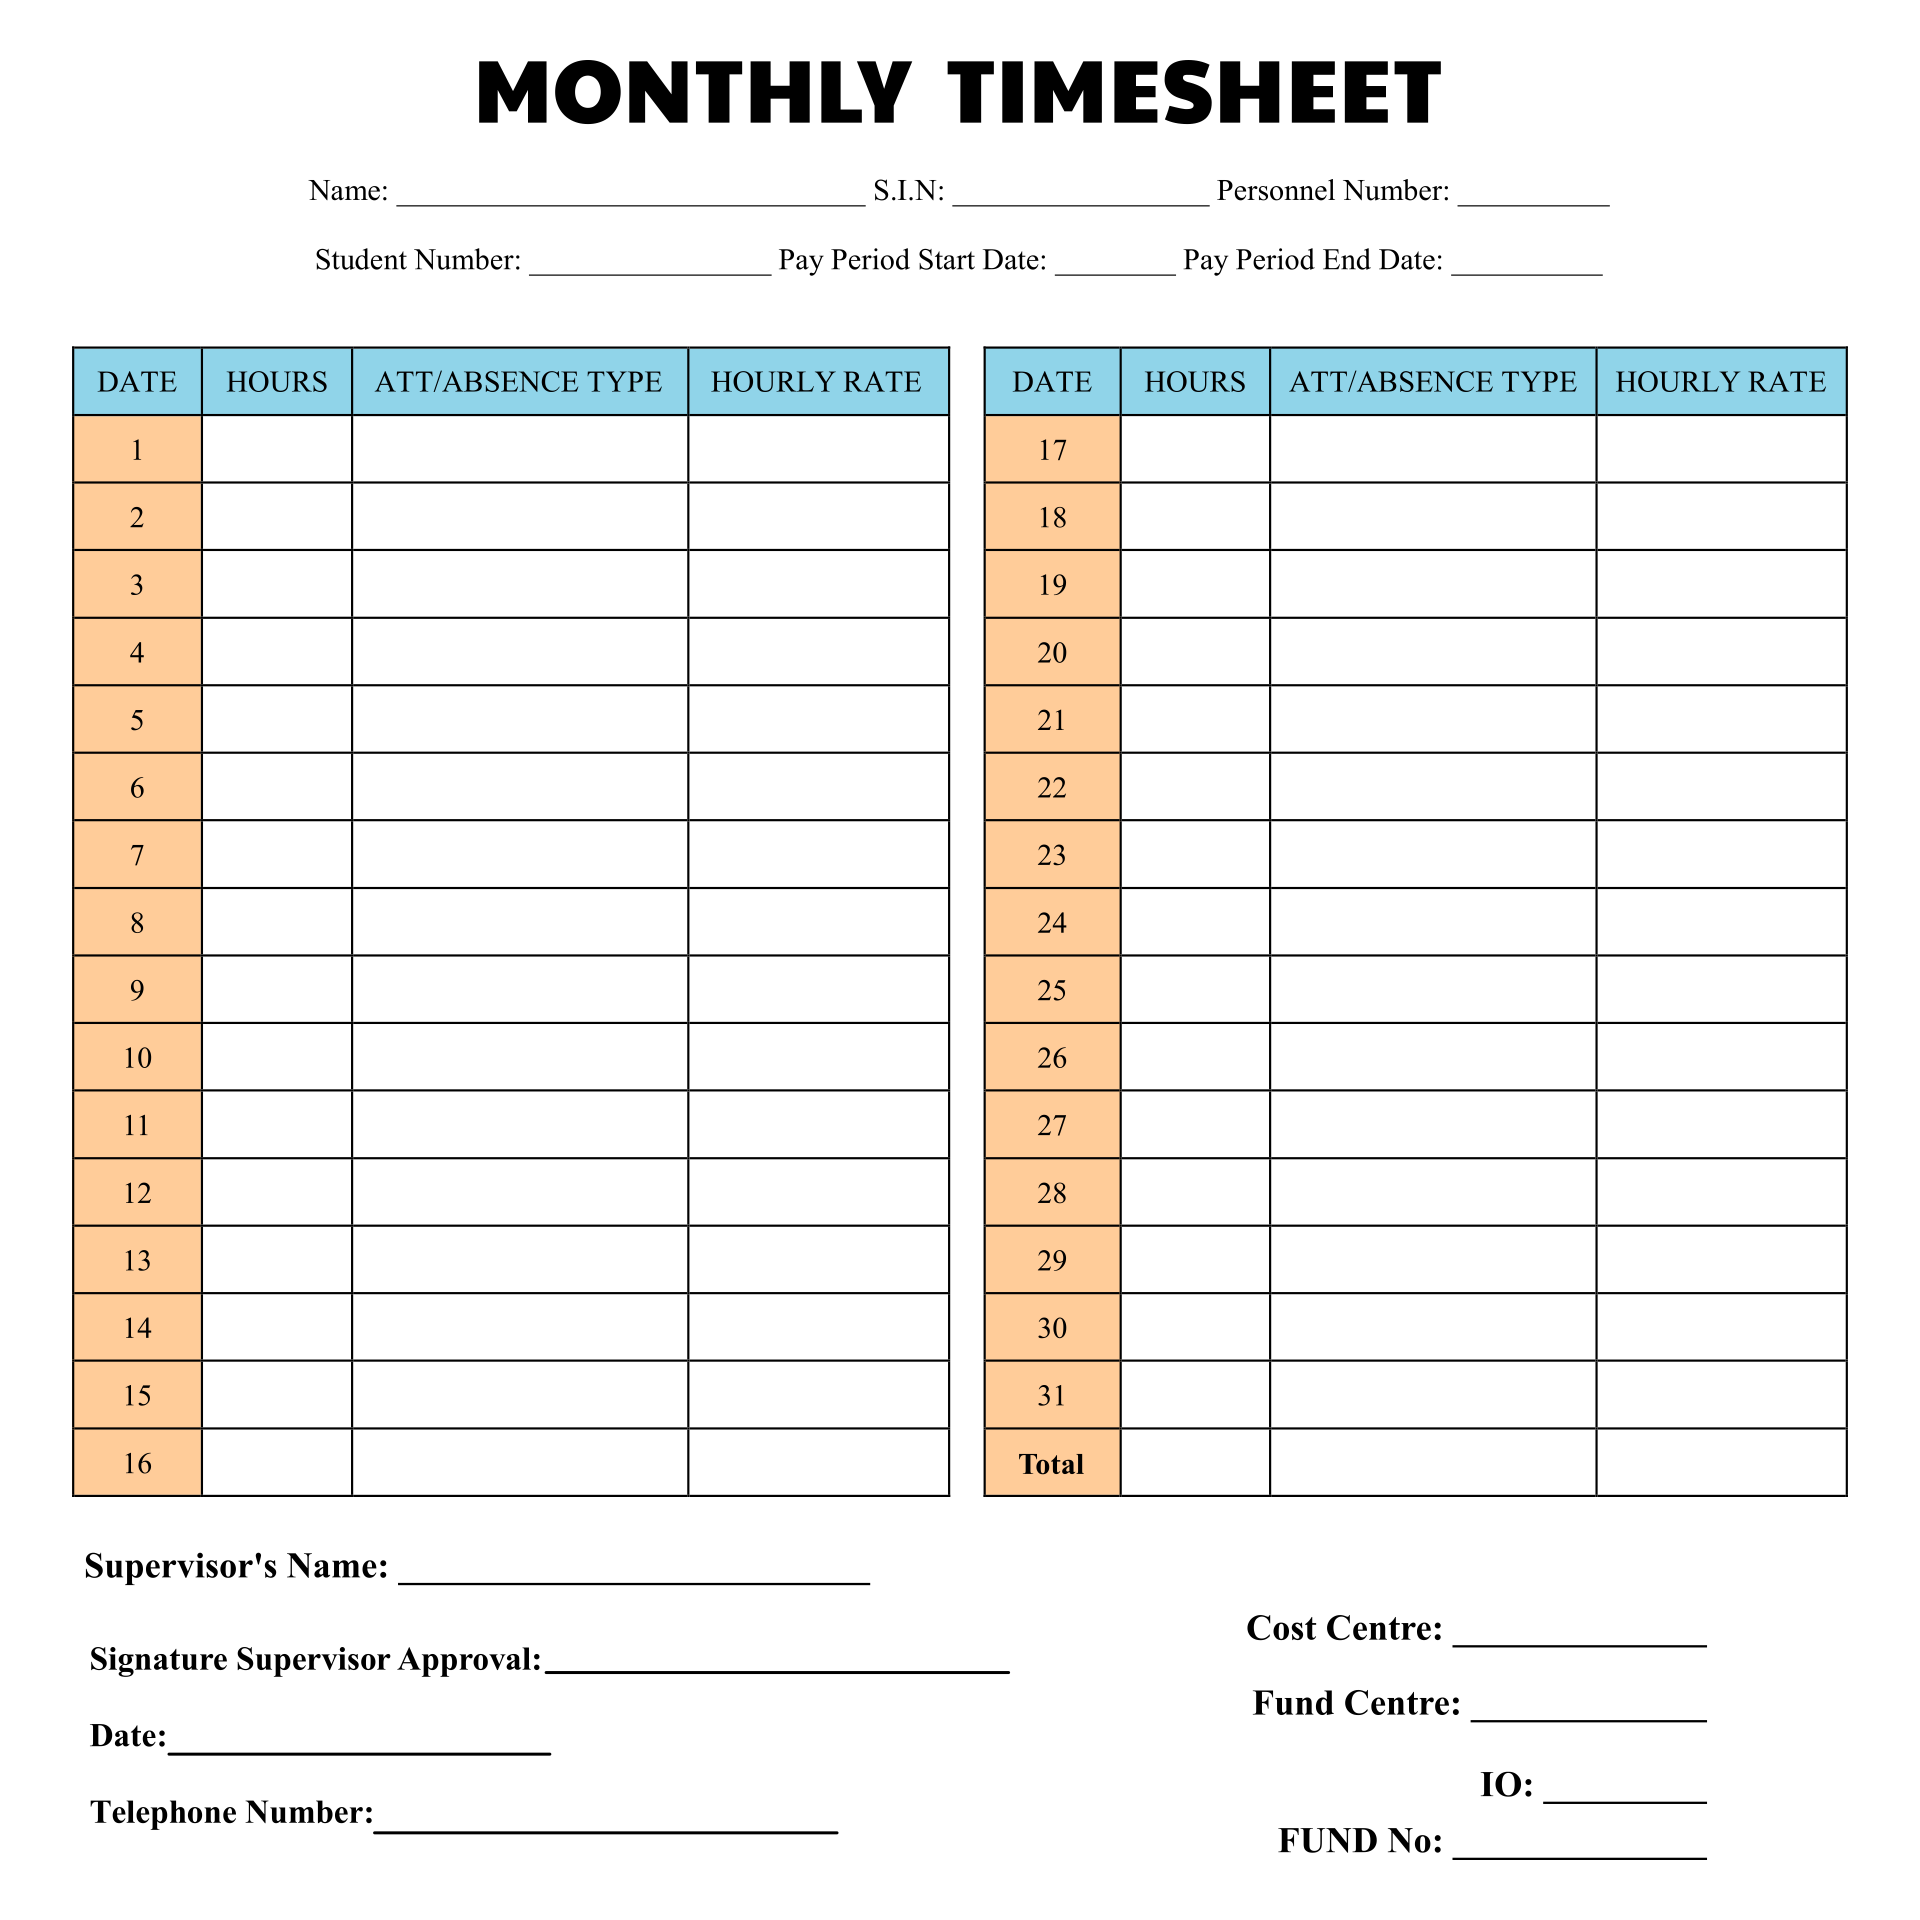 download-weekly-timesheet-template-excel-pdf-rtf-free-18-sample